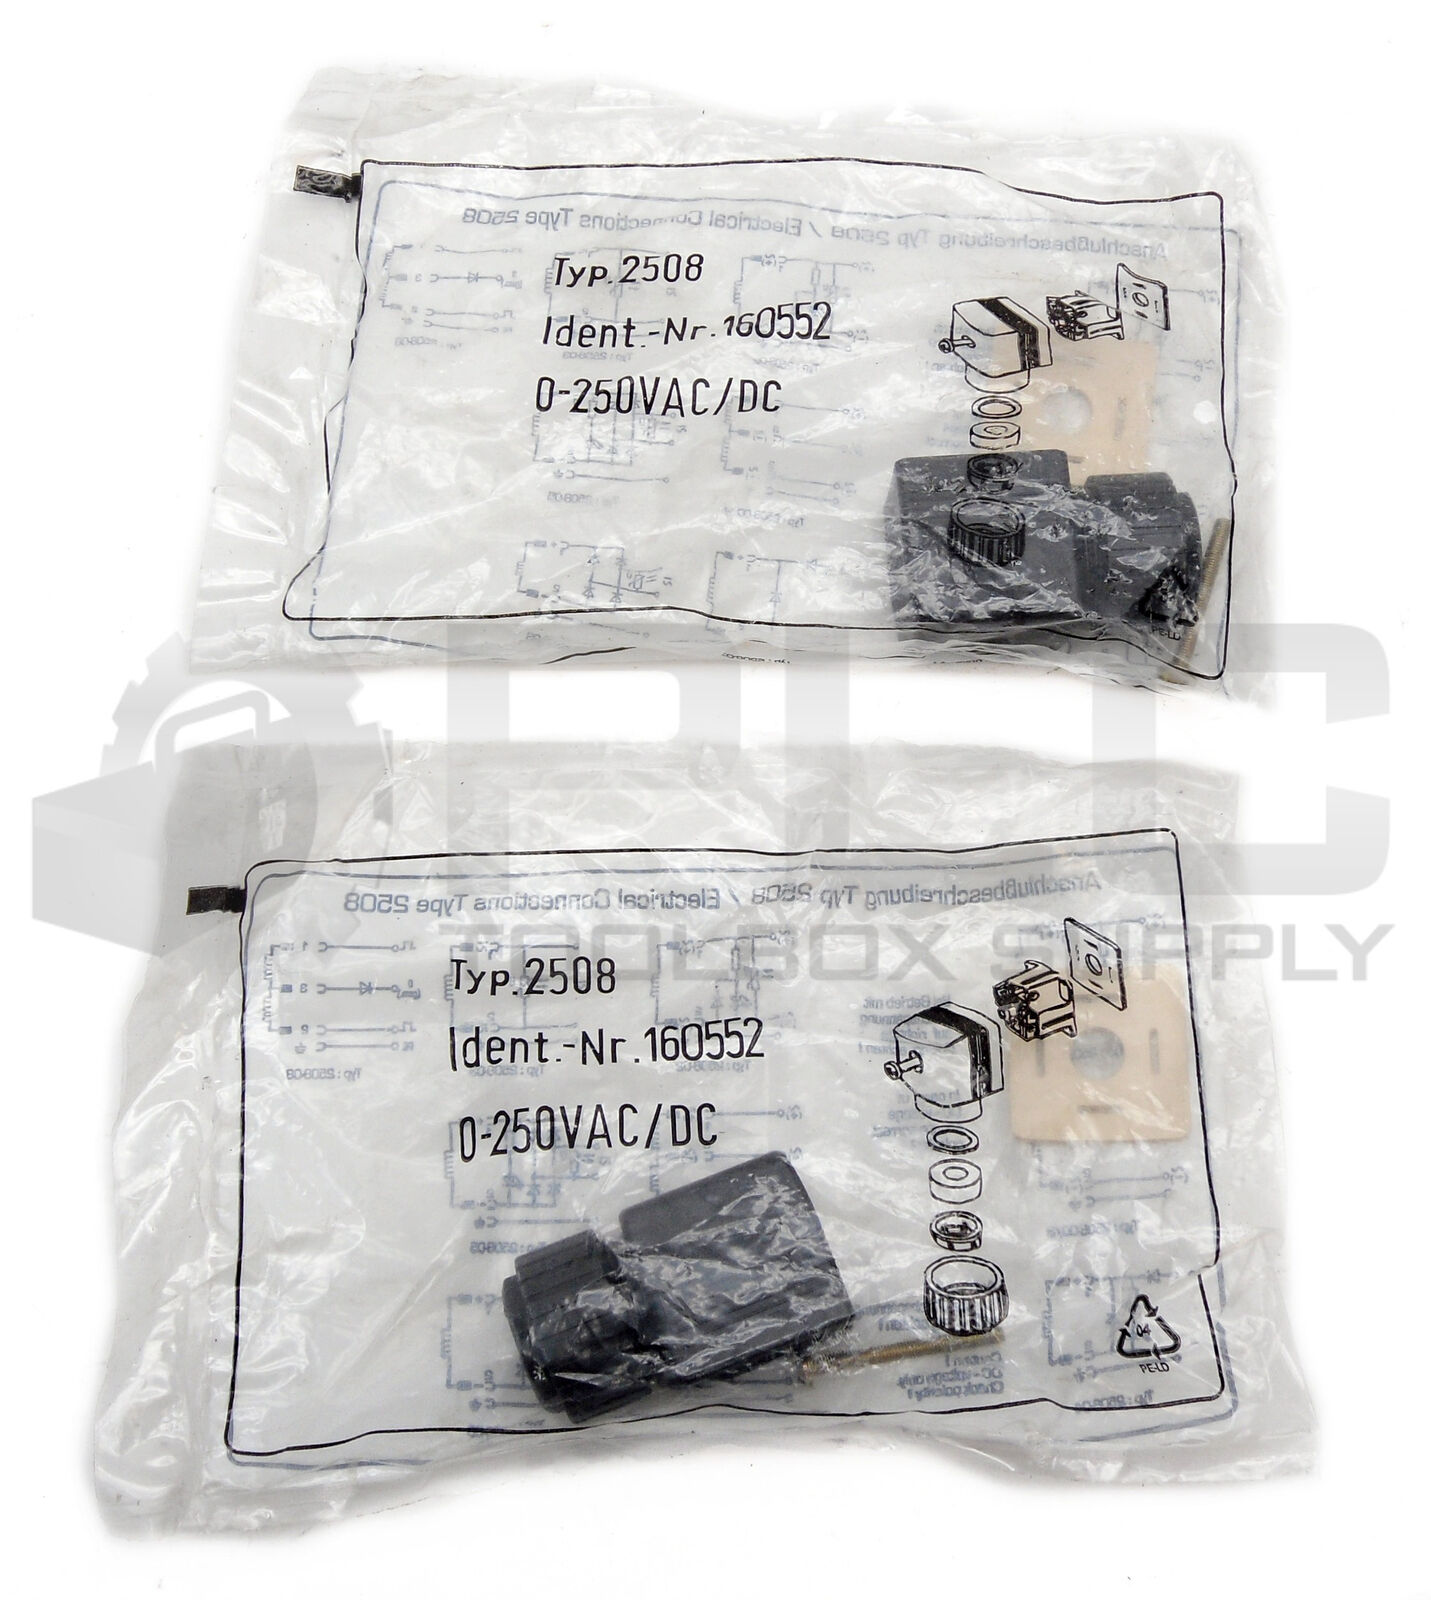 LOT OF 2 NEW ANSCHLUBBESCHREIBUNG 2508 ELECTRICAL CONNECTIONS 0-250VAC/DC 160552